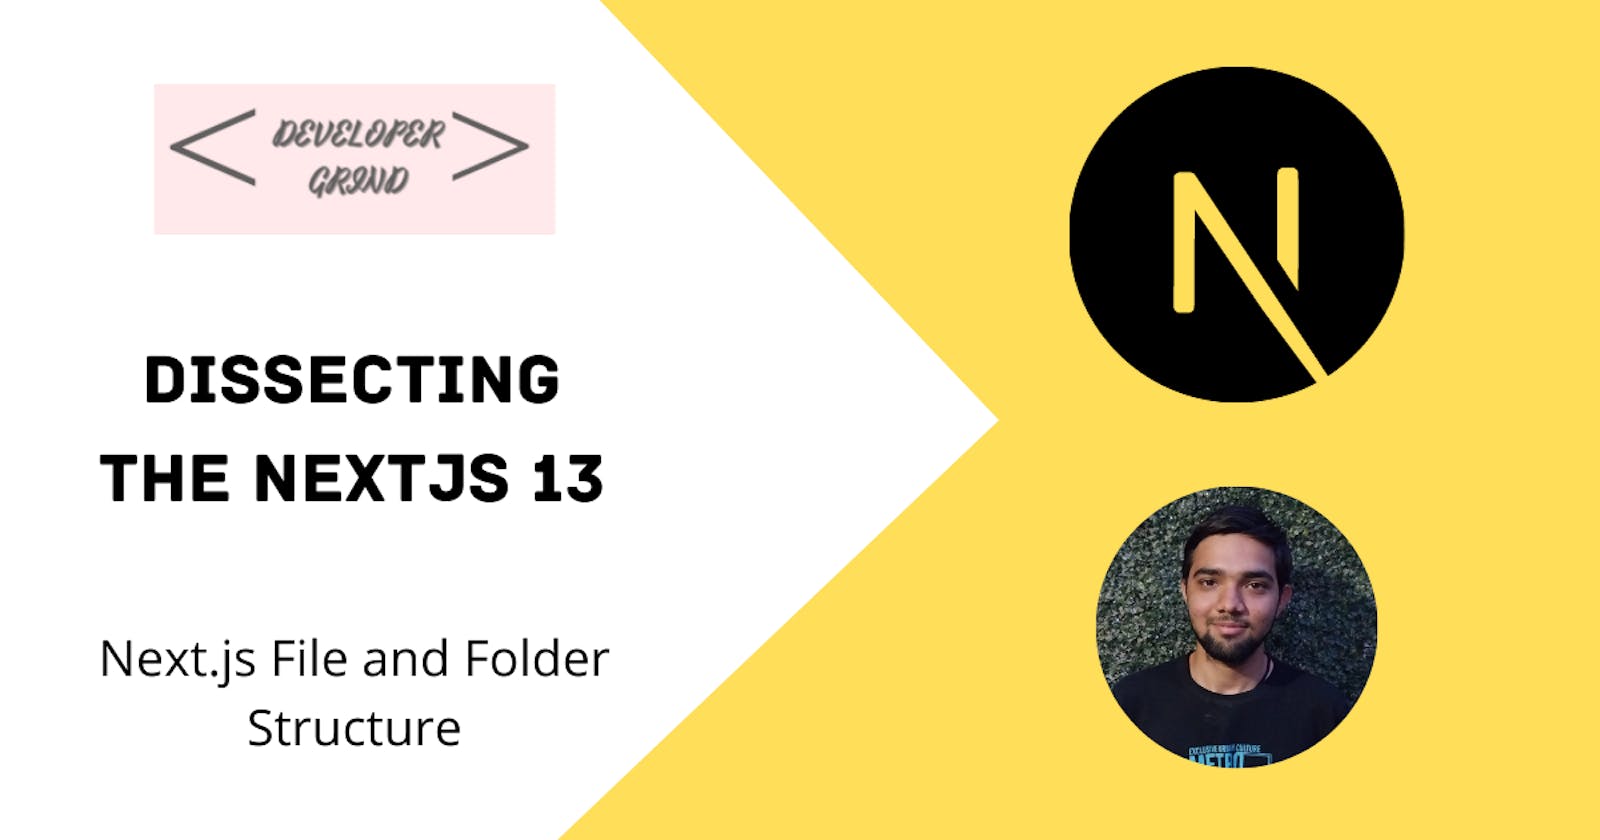 Next.js File and Folder Structure